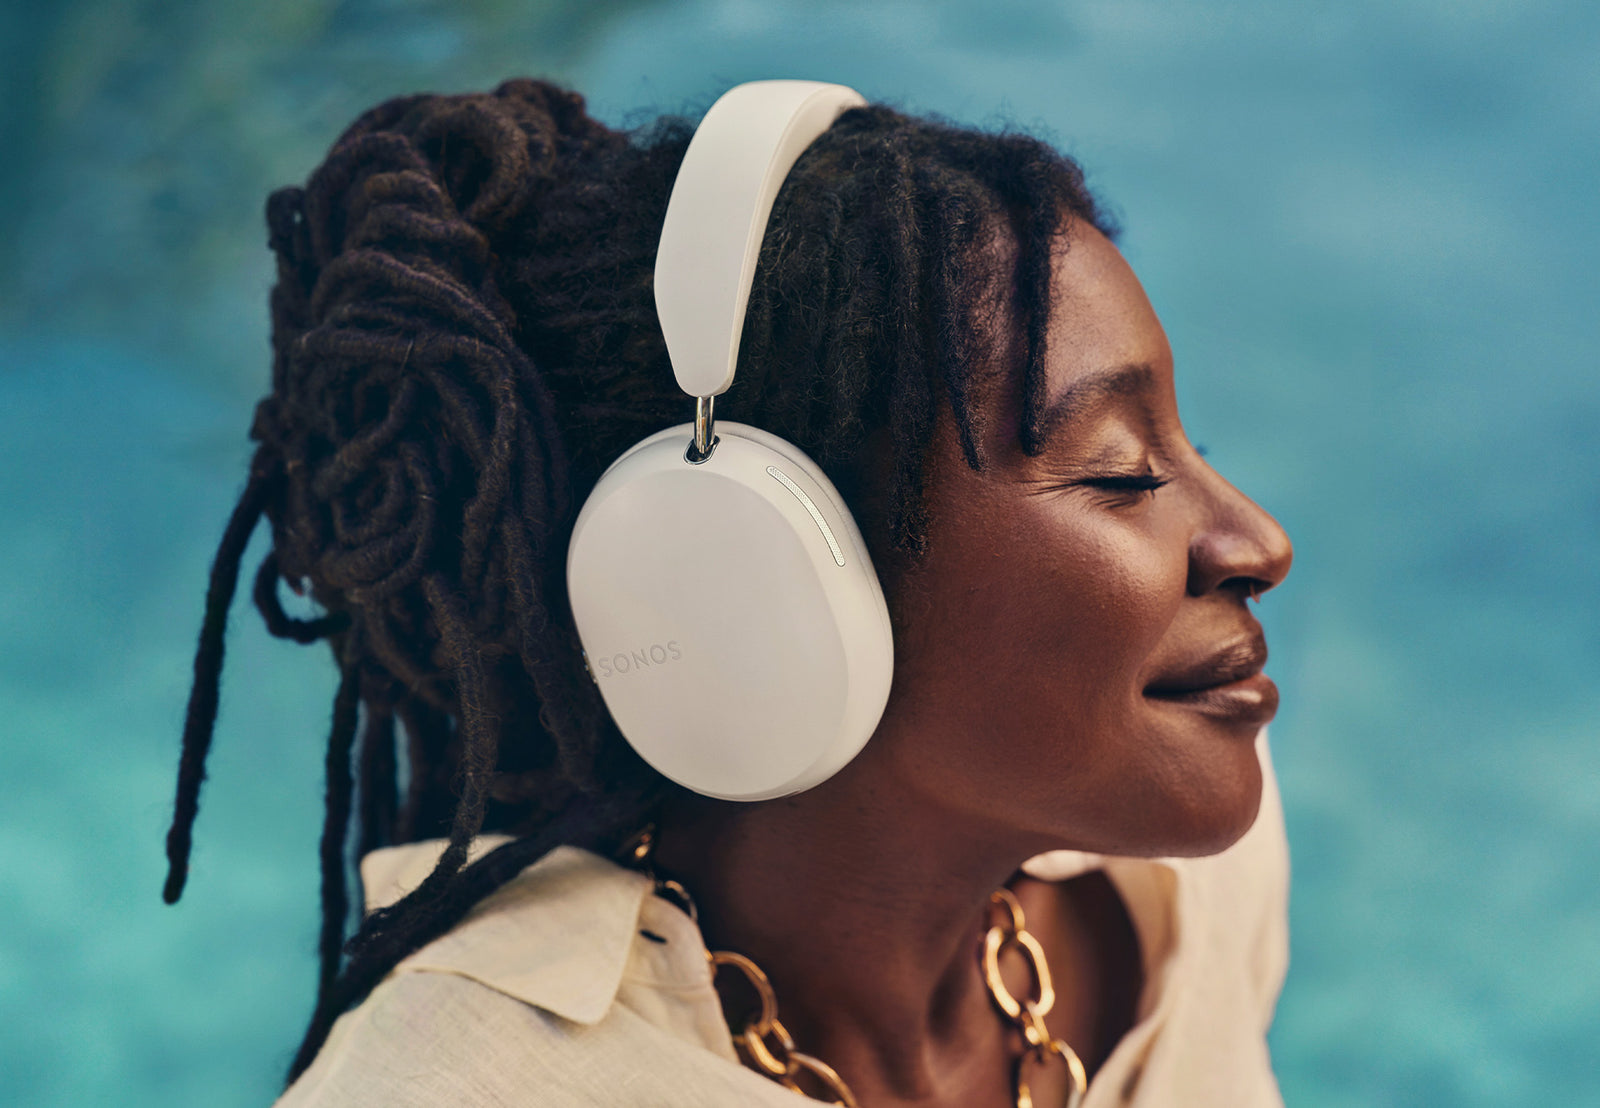 Sonos Ace Headphones: Everything You Need To Know